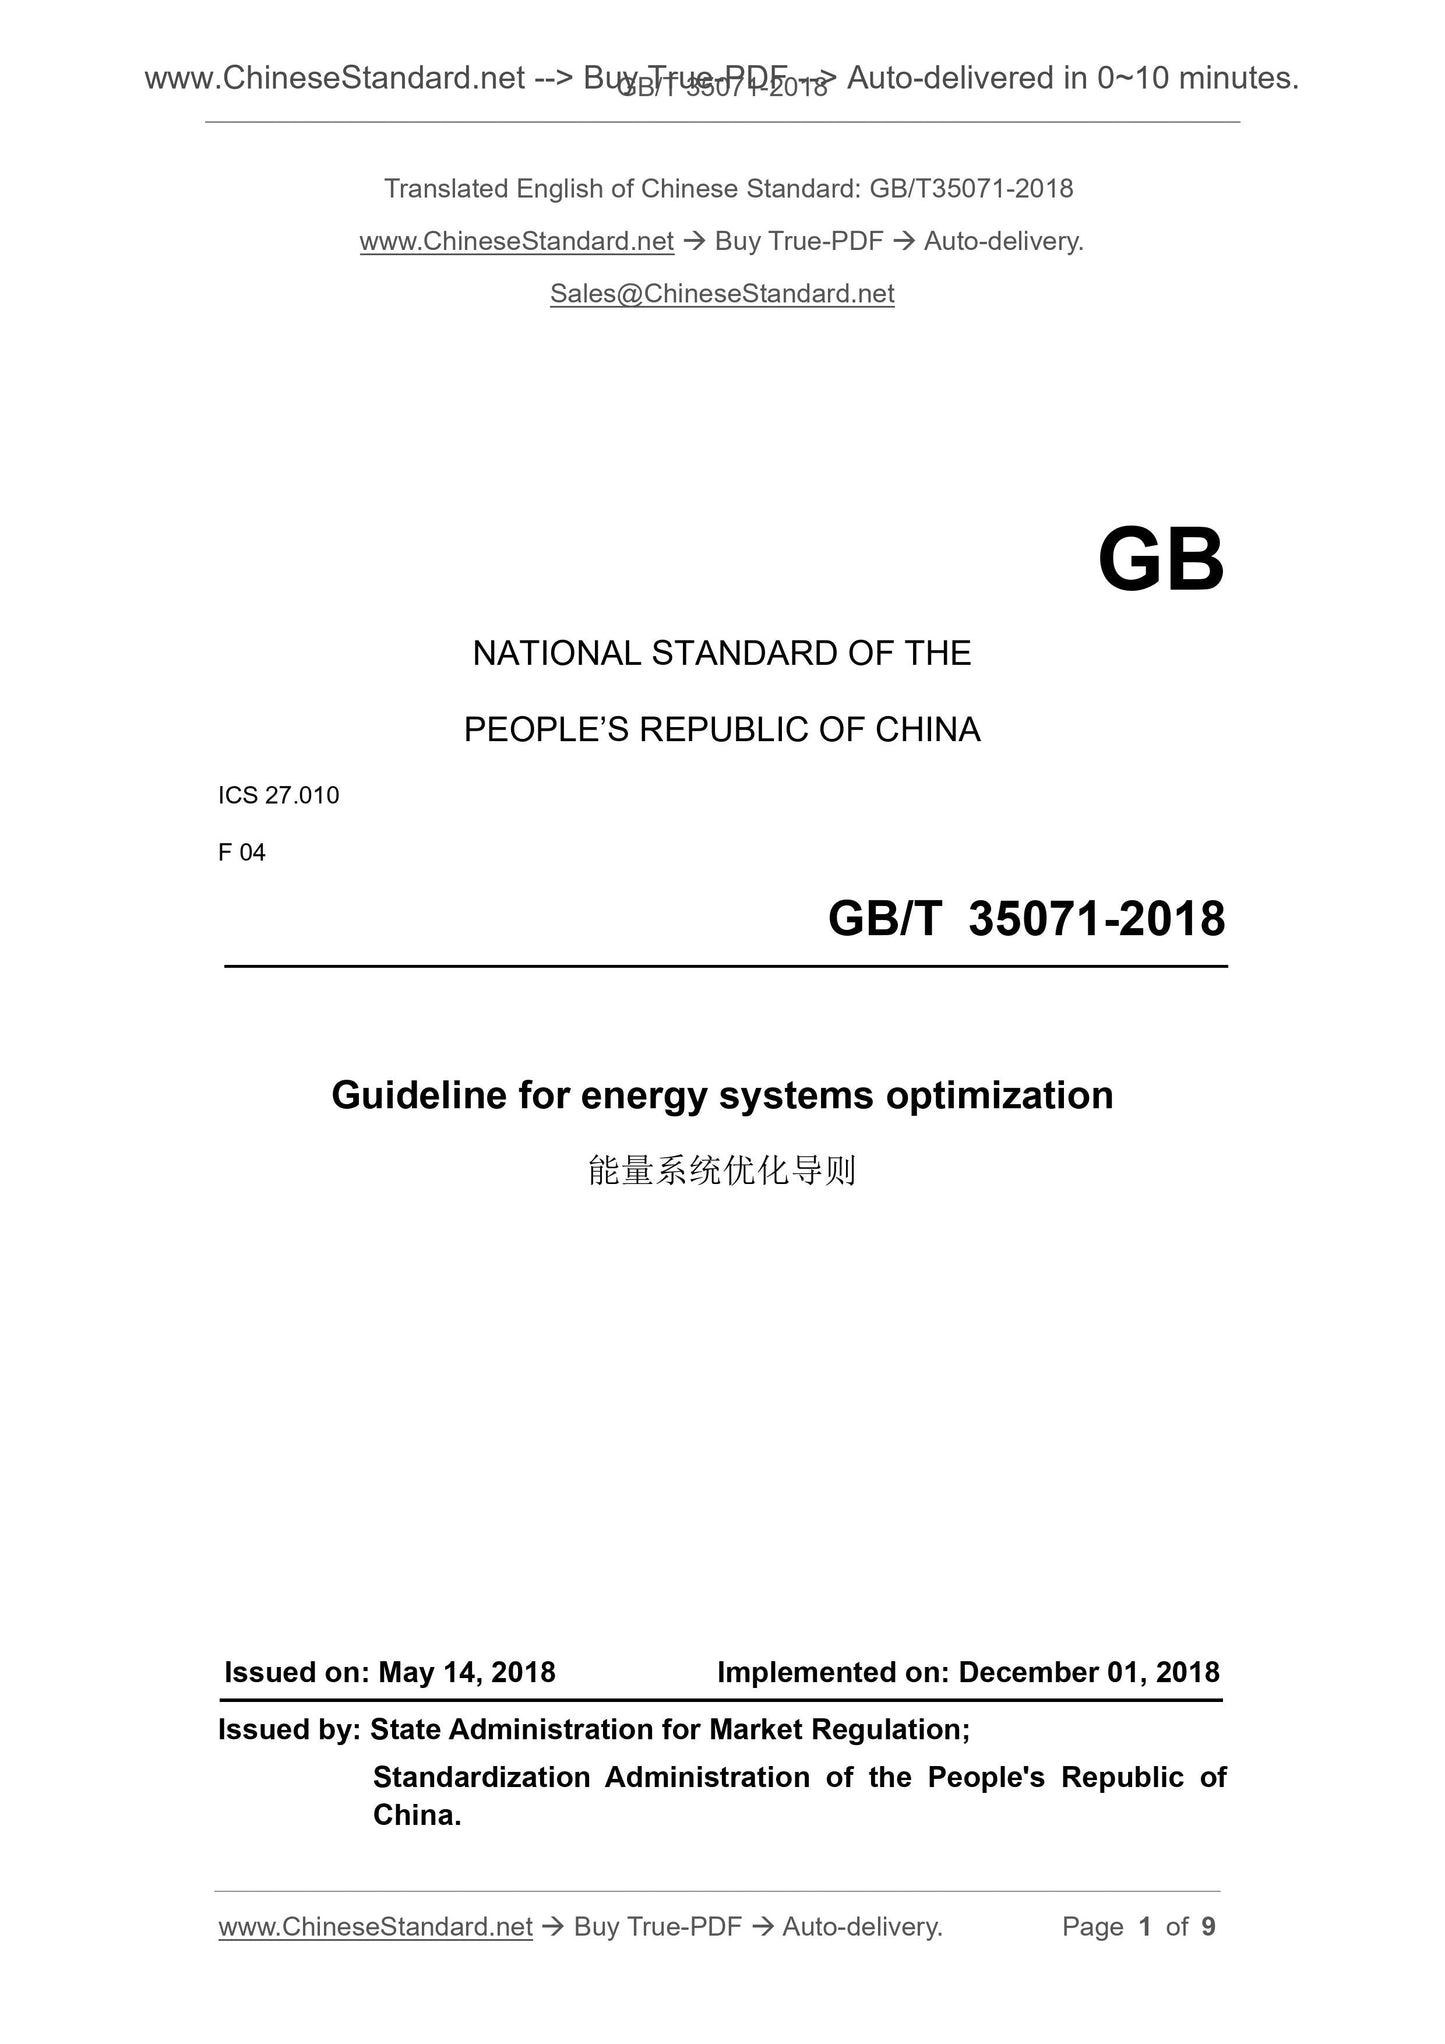 GB/T 35071-2018 Page 1